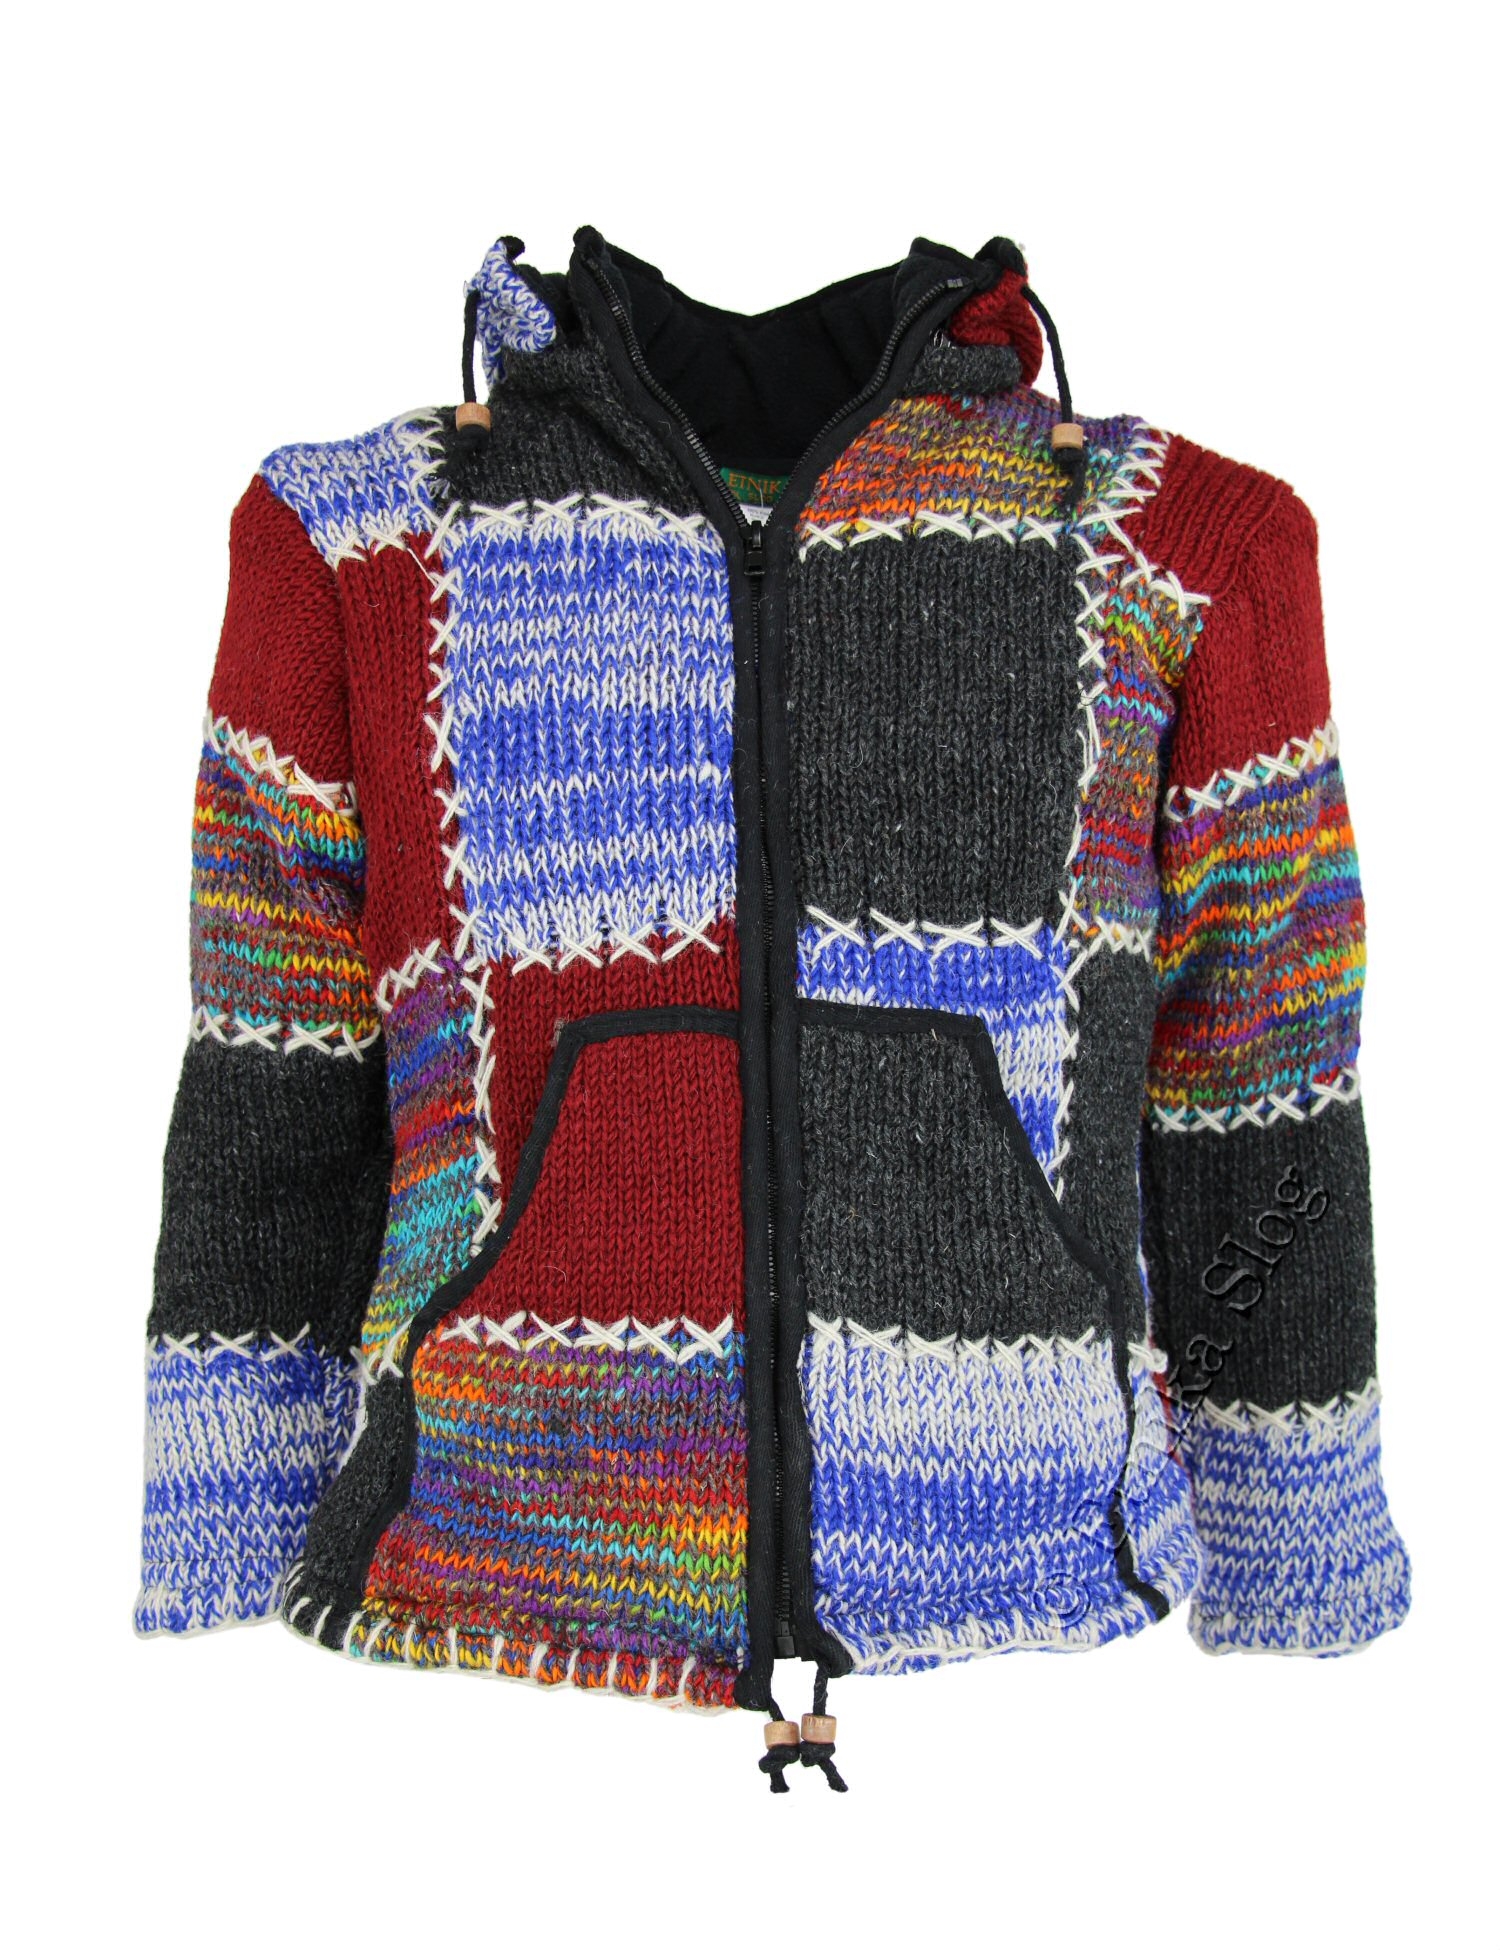 WOOLEN JACKETS, PONCHOS AND SWEATERS AB-GL32 - Oriente Import S.r.l.